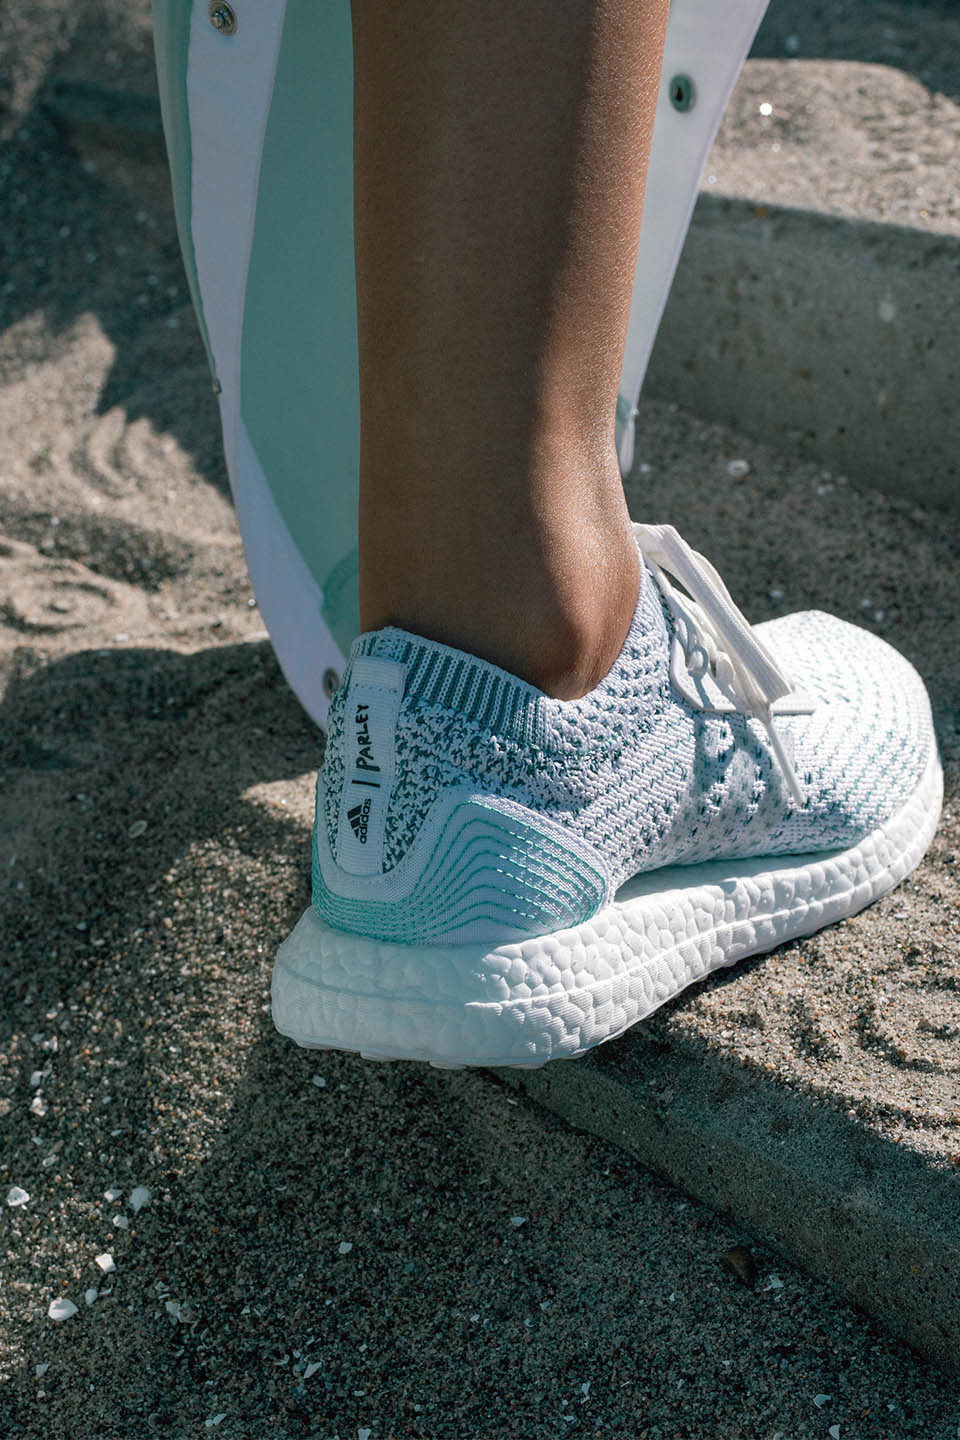 adidas x Parley Continues to Raise Awareness on the Perils of Ocean Pollution